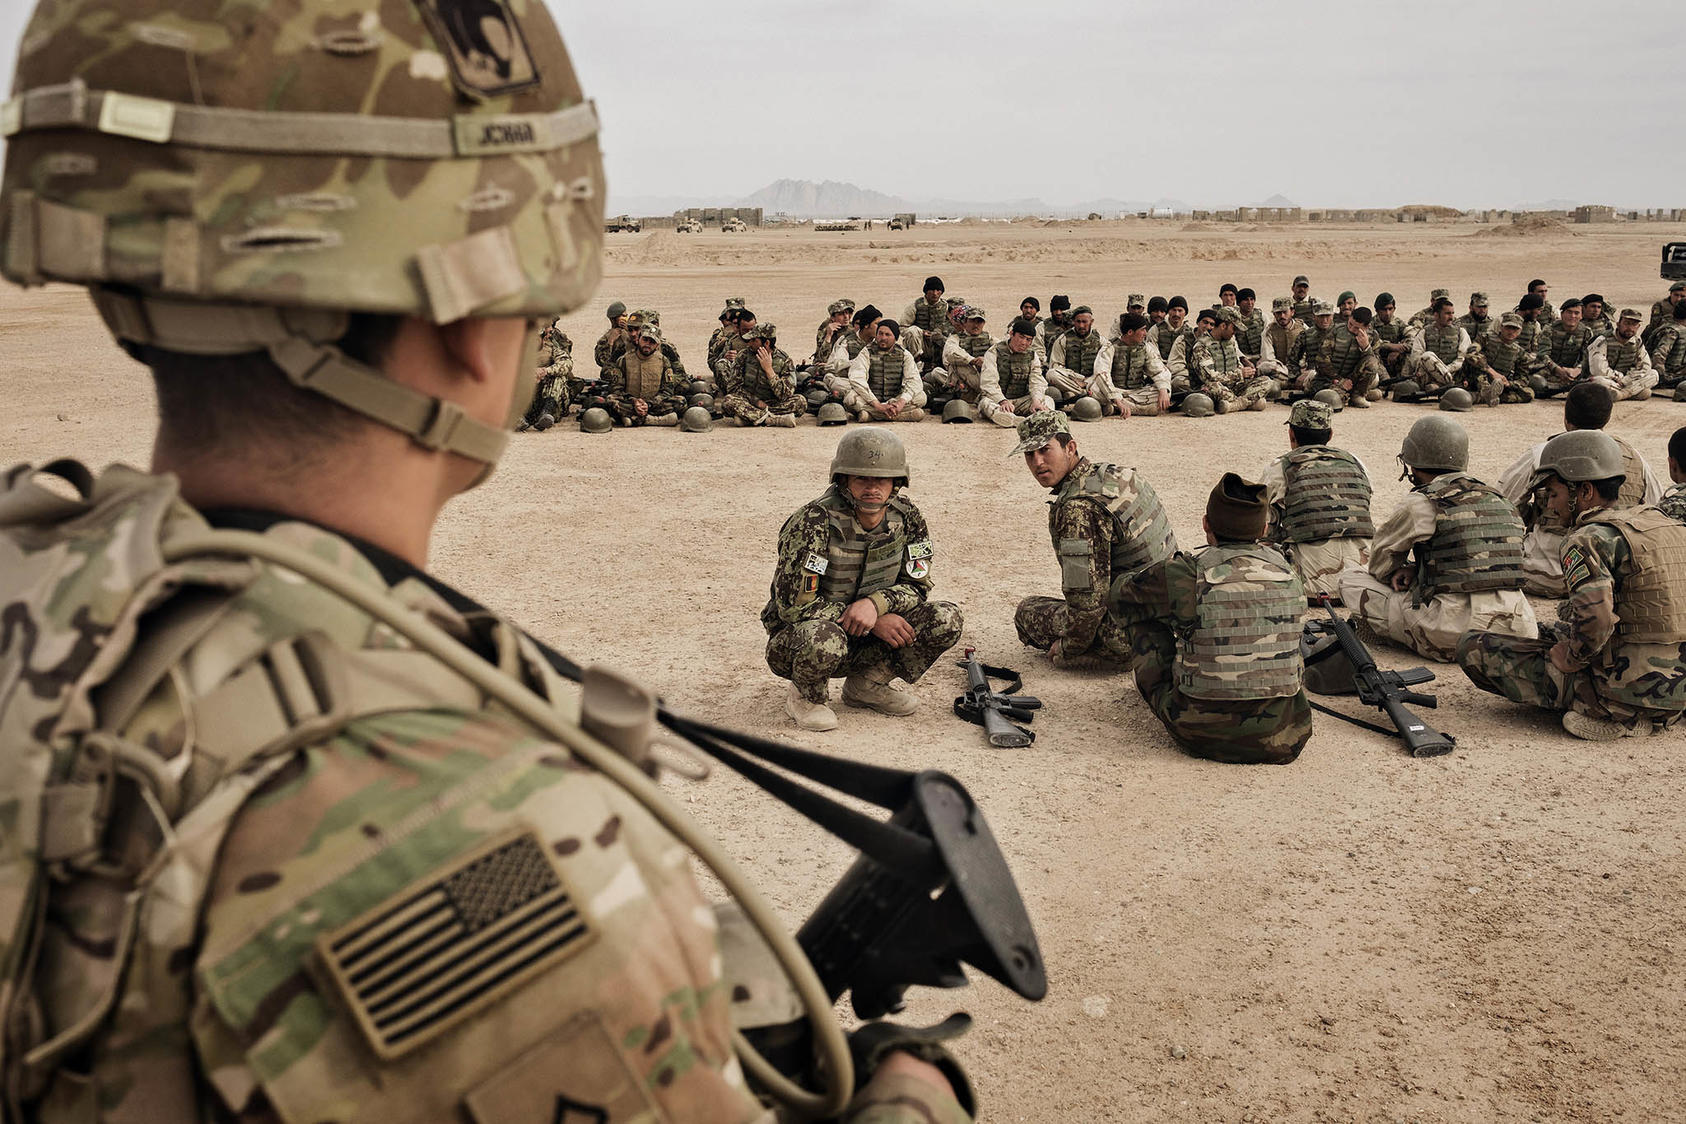 American soldiers overseeing training of their Afghan counterparts at Camp Bastion in Helmand Province, Afghanistan, March 22, 2016. (Adam Ferguson/The New York Times)